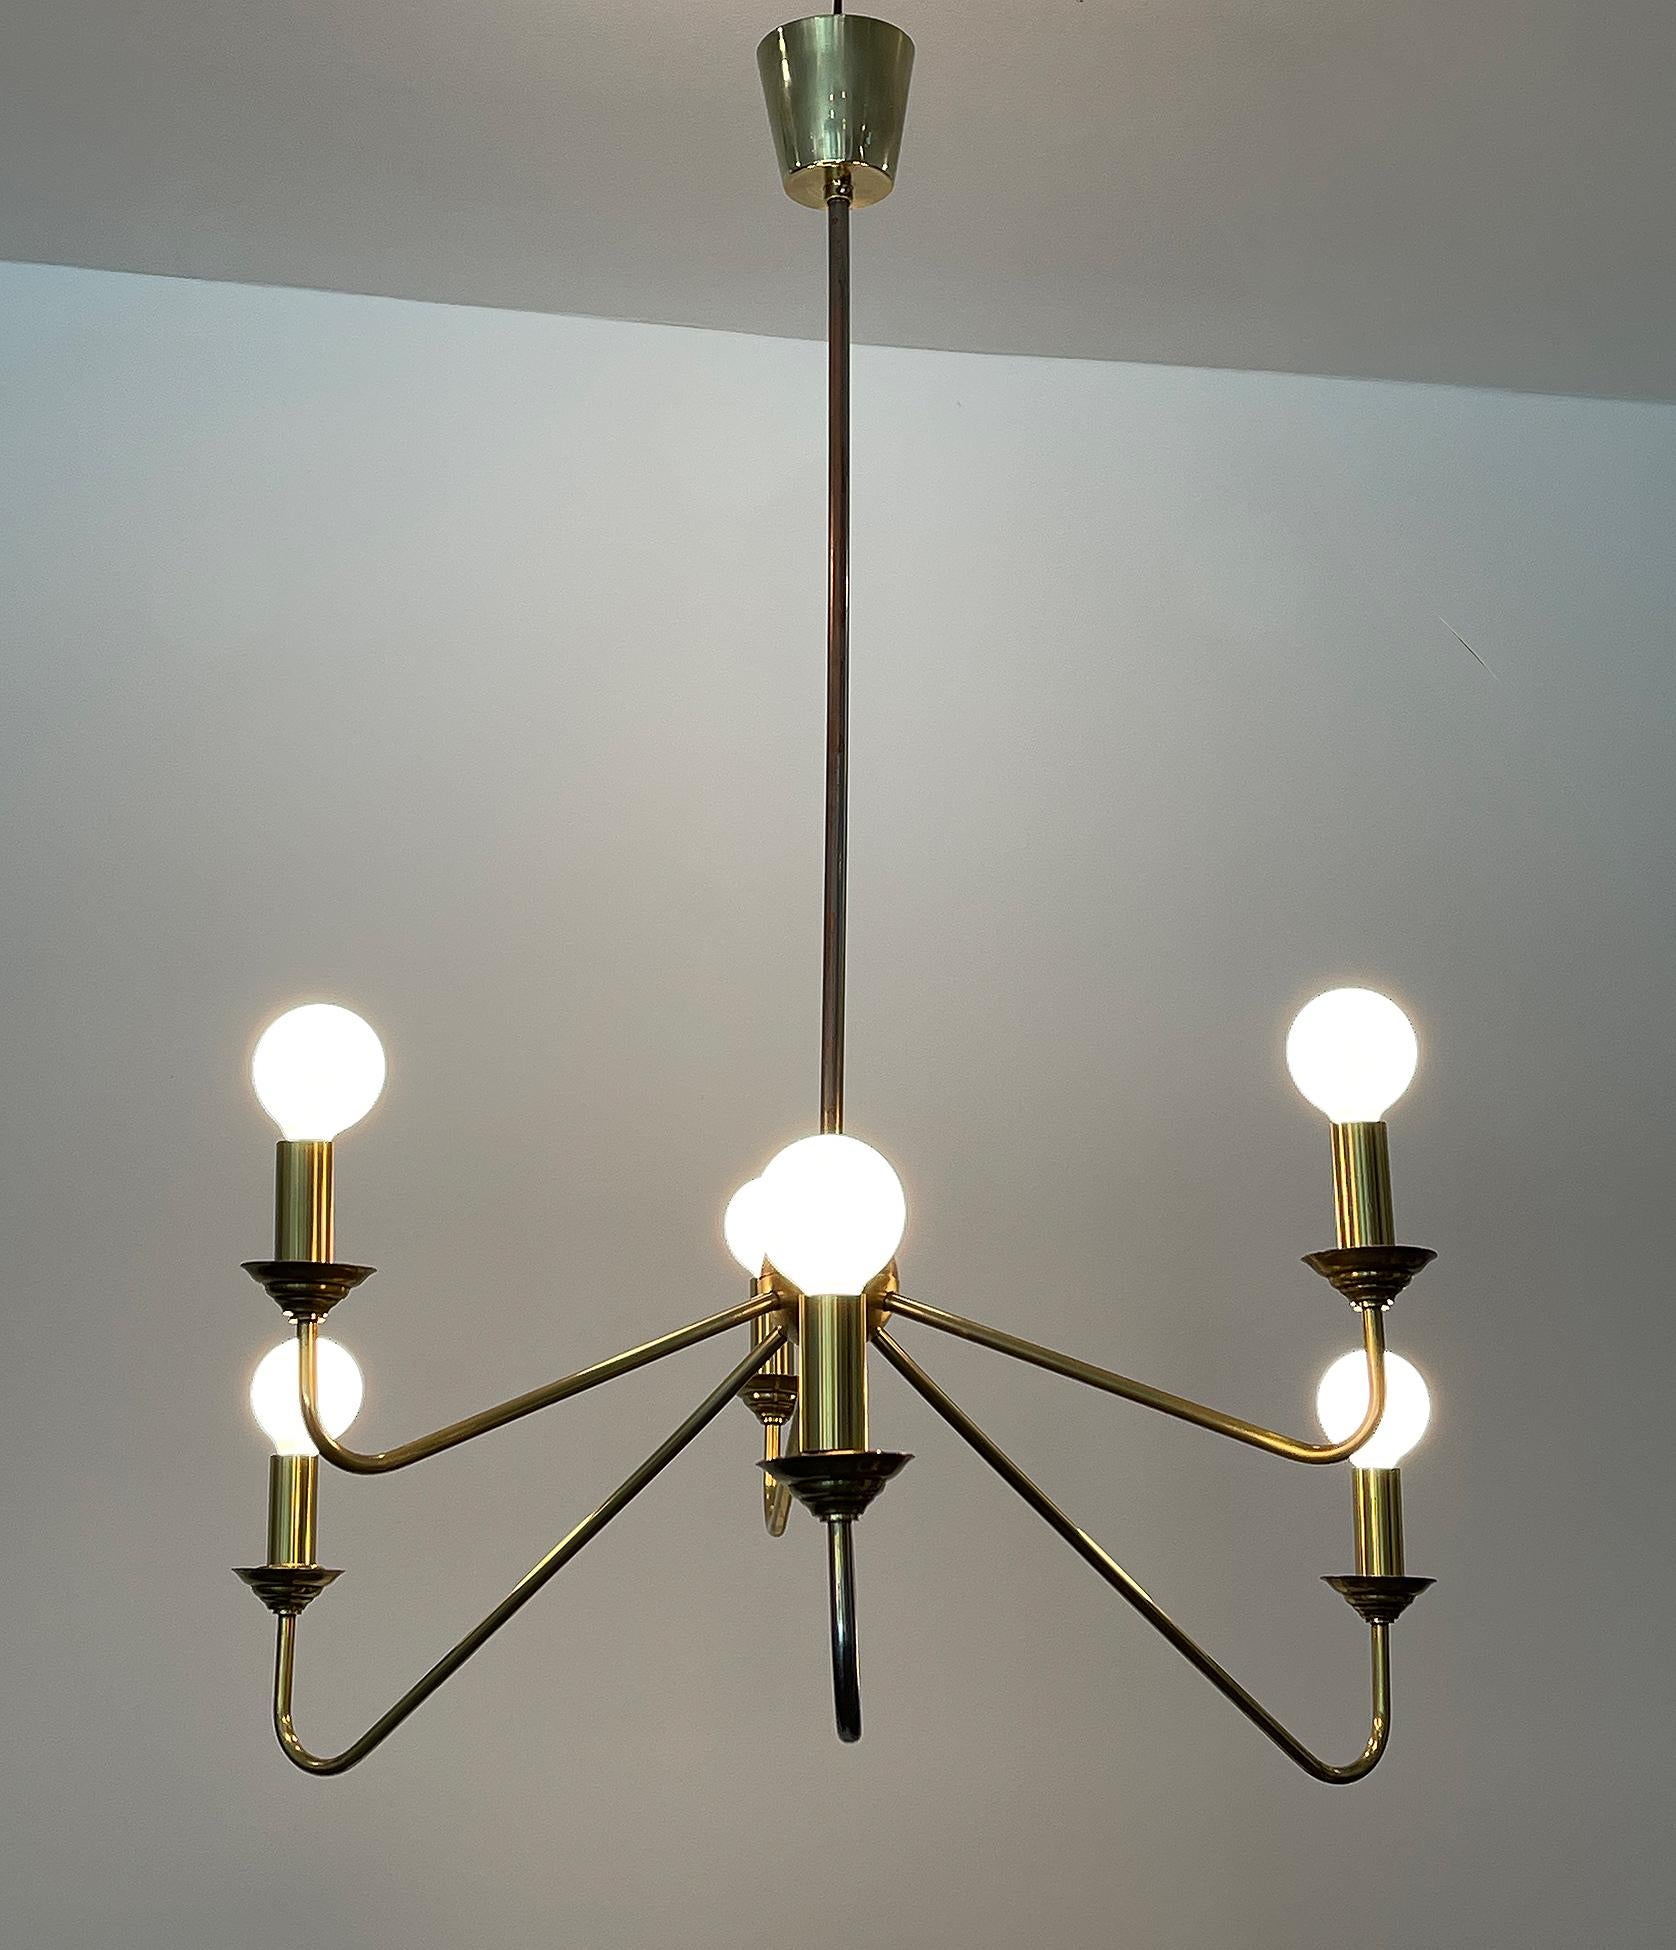 Brass chandelier, Robert Caillat, circa 1955.
Brass chandelier from a set of ten with six-light. Fully rewired to be used in US.
Candelabra sockets with brass hardware.
We got ten similar chandeliers from this hotel, different colors and degrees